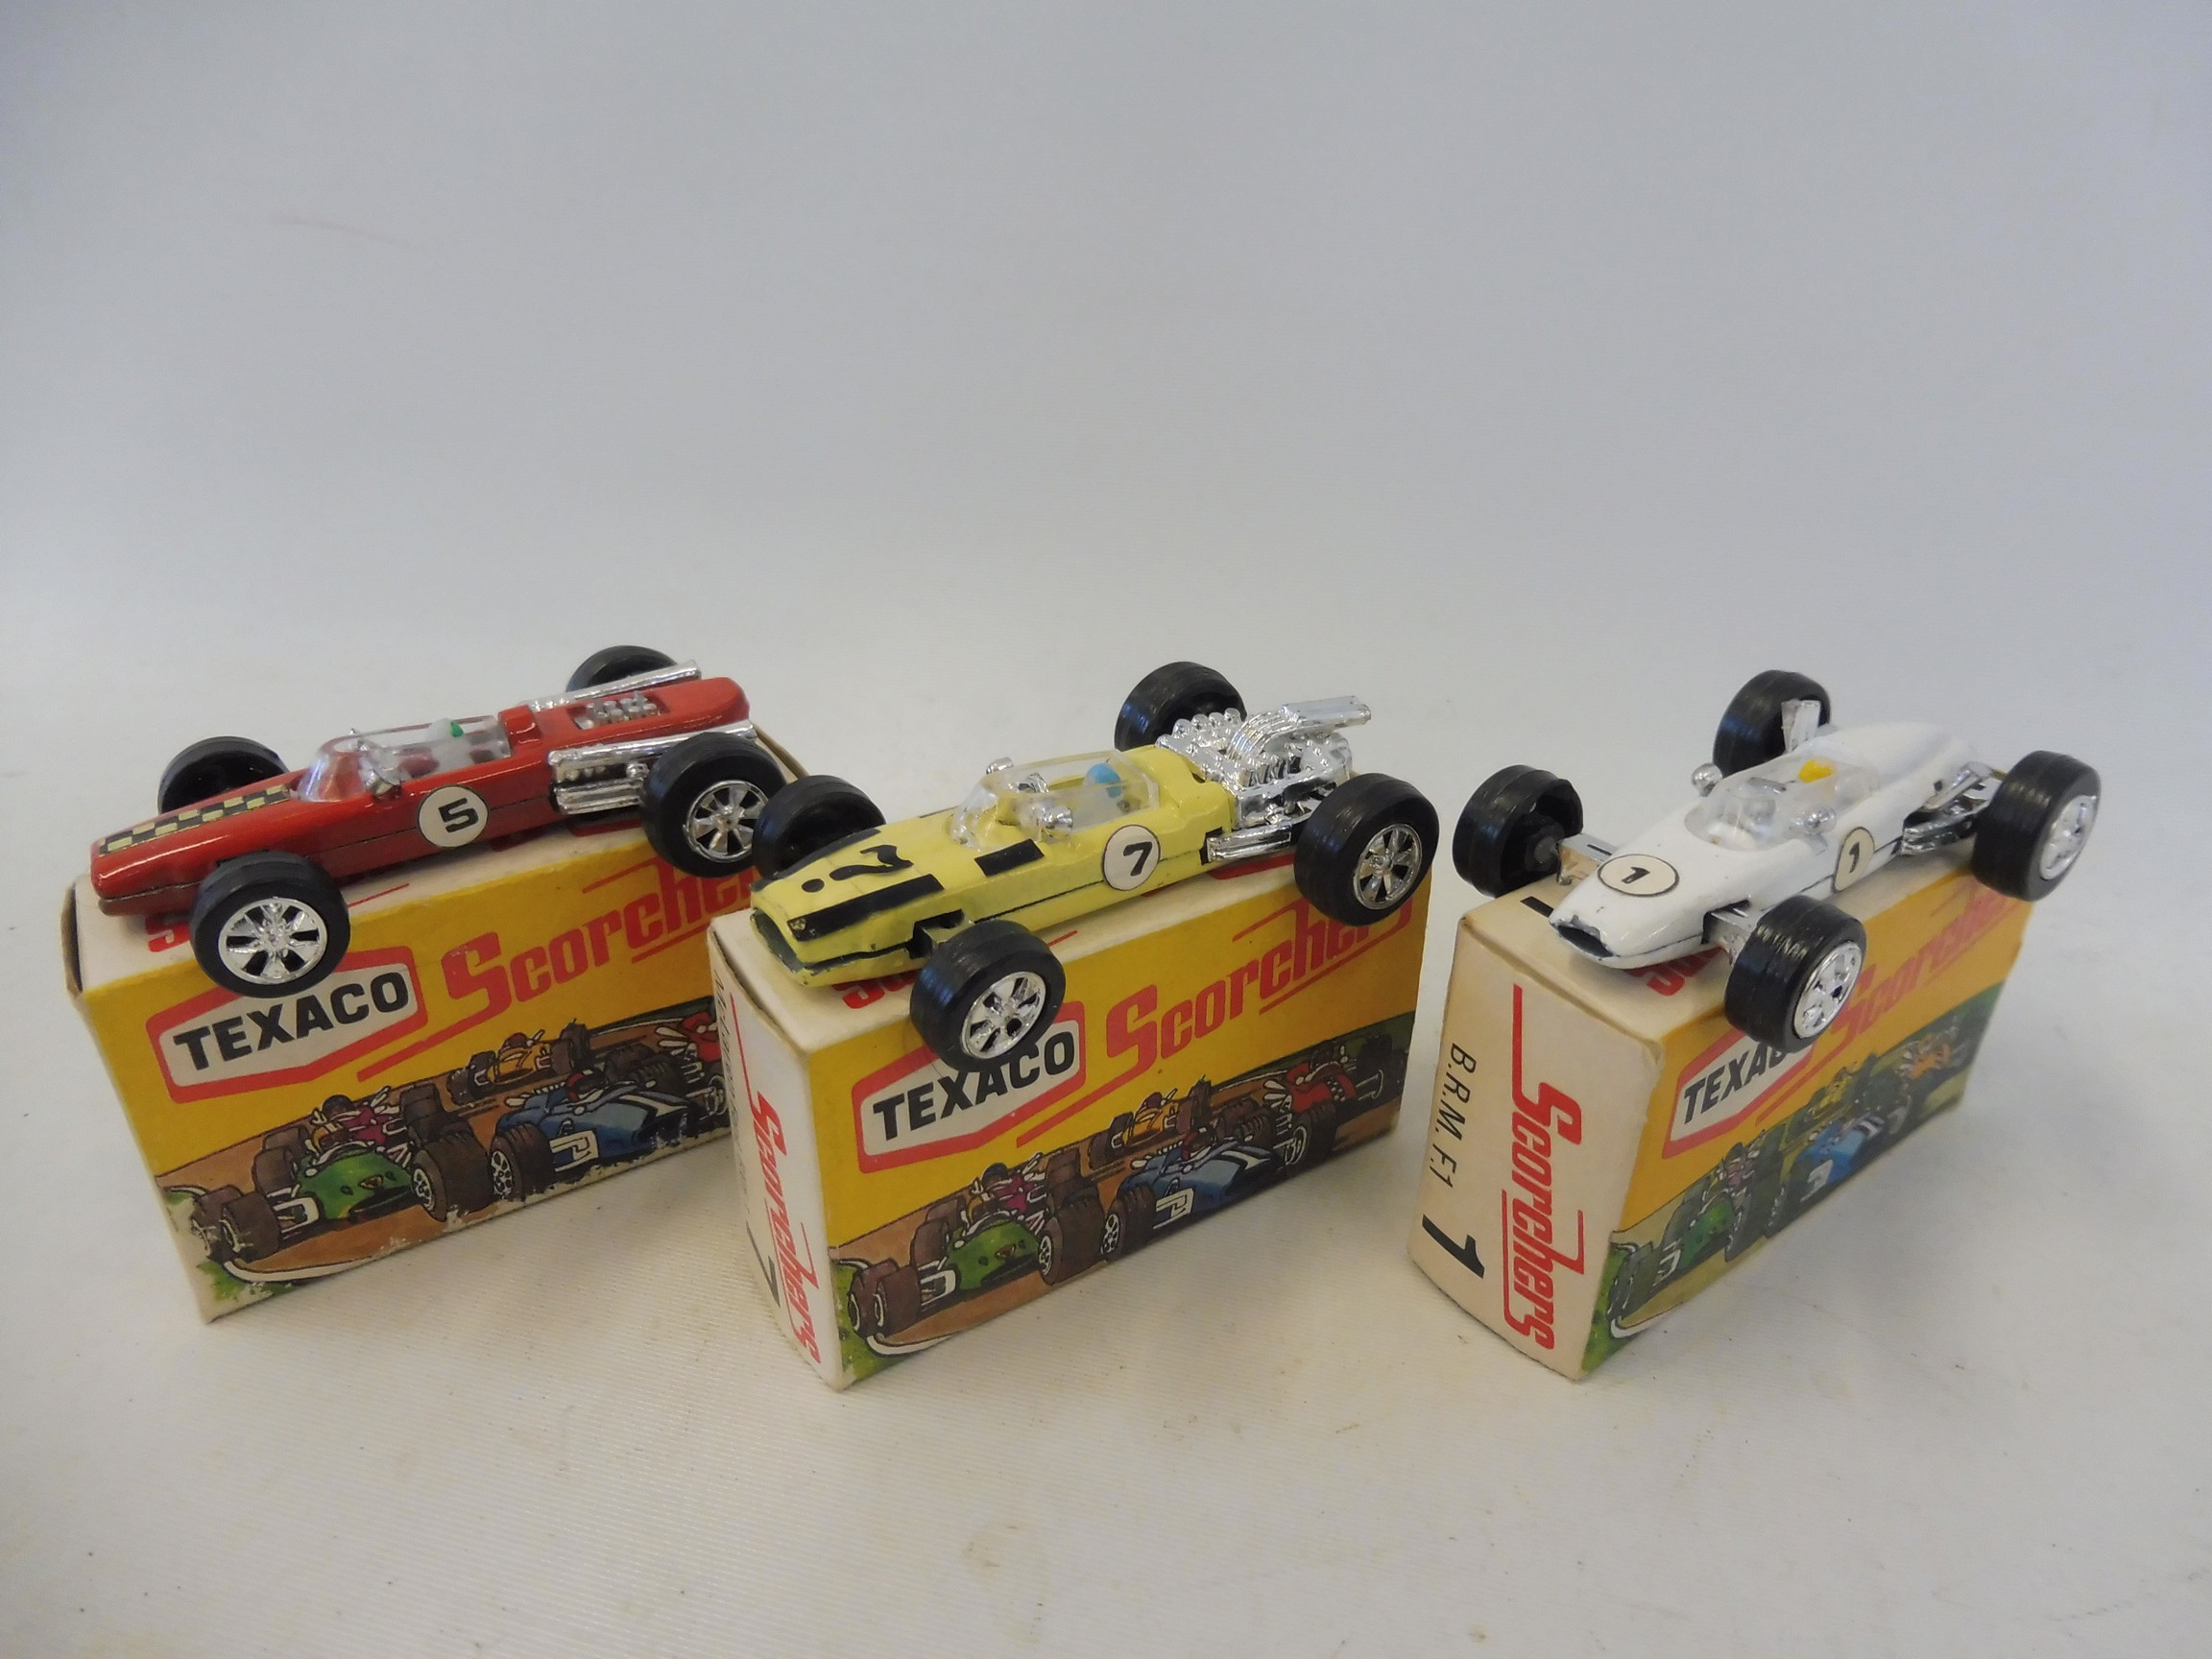 Three Texaco Scorchers in excellent condition, no.1 BRM, a no.7 McLaren Ford and a no.5 Brabbham